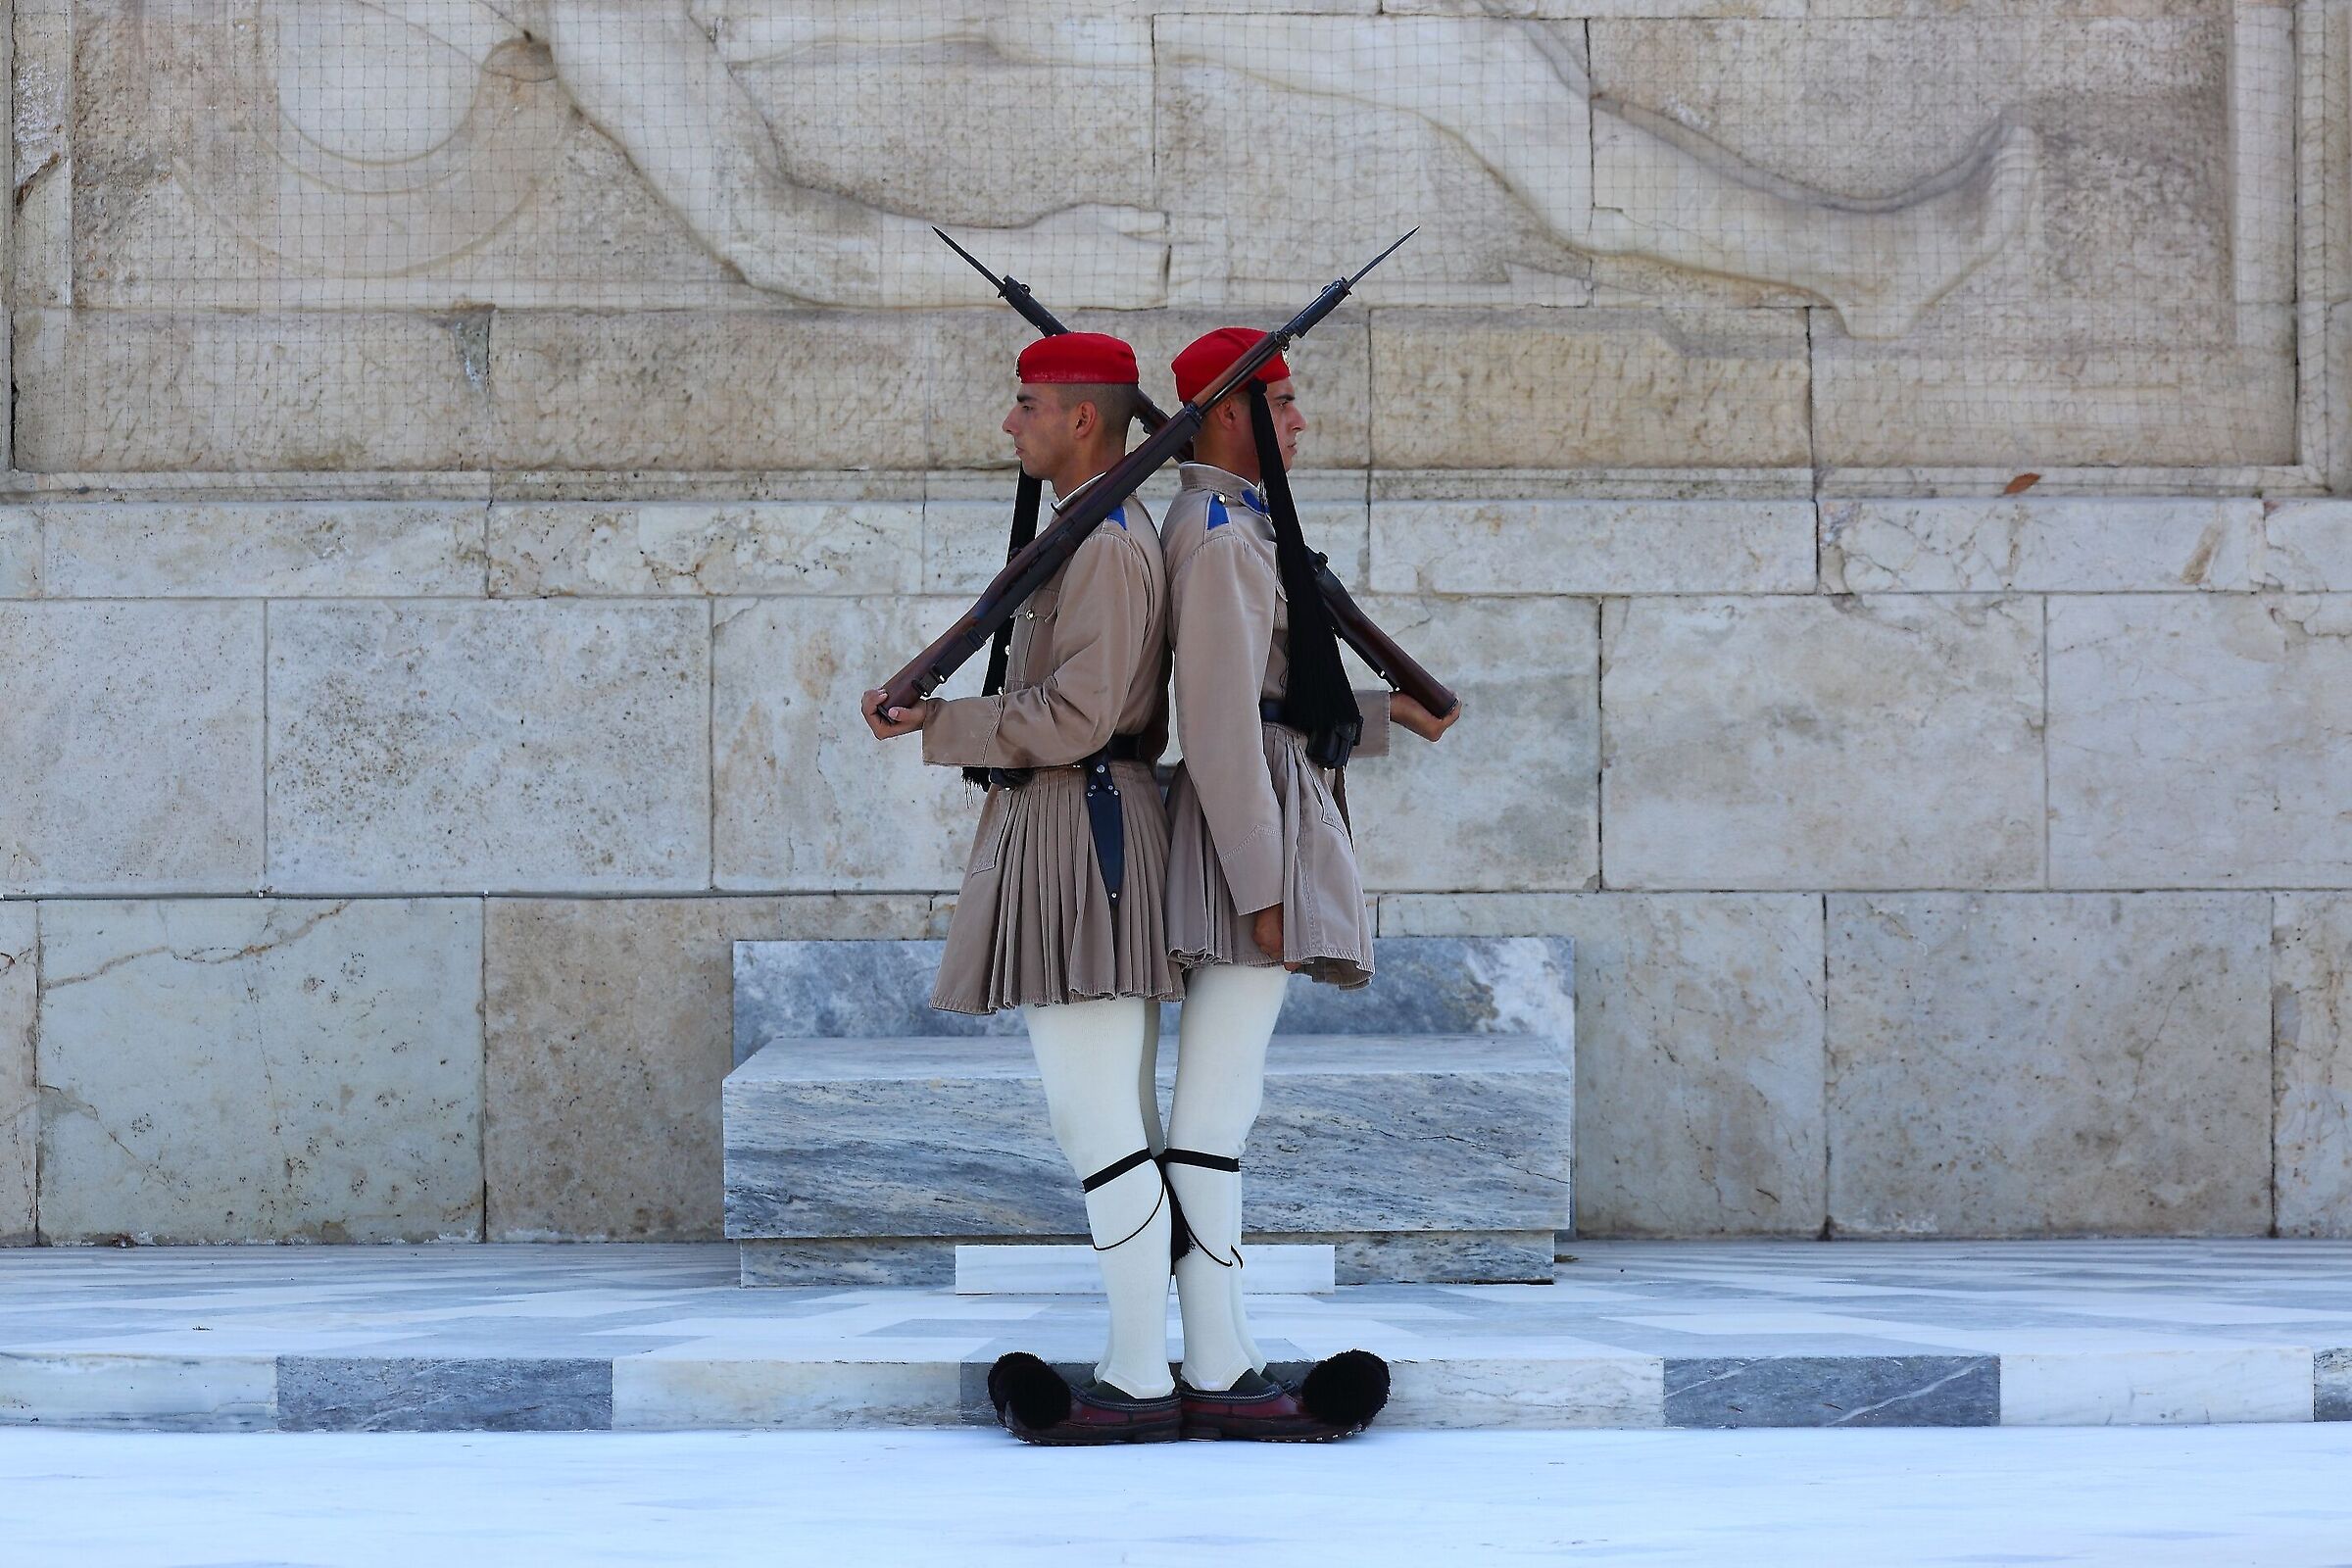 Guard of Honour at the Unknown Soldier in Syntagma Square...